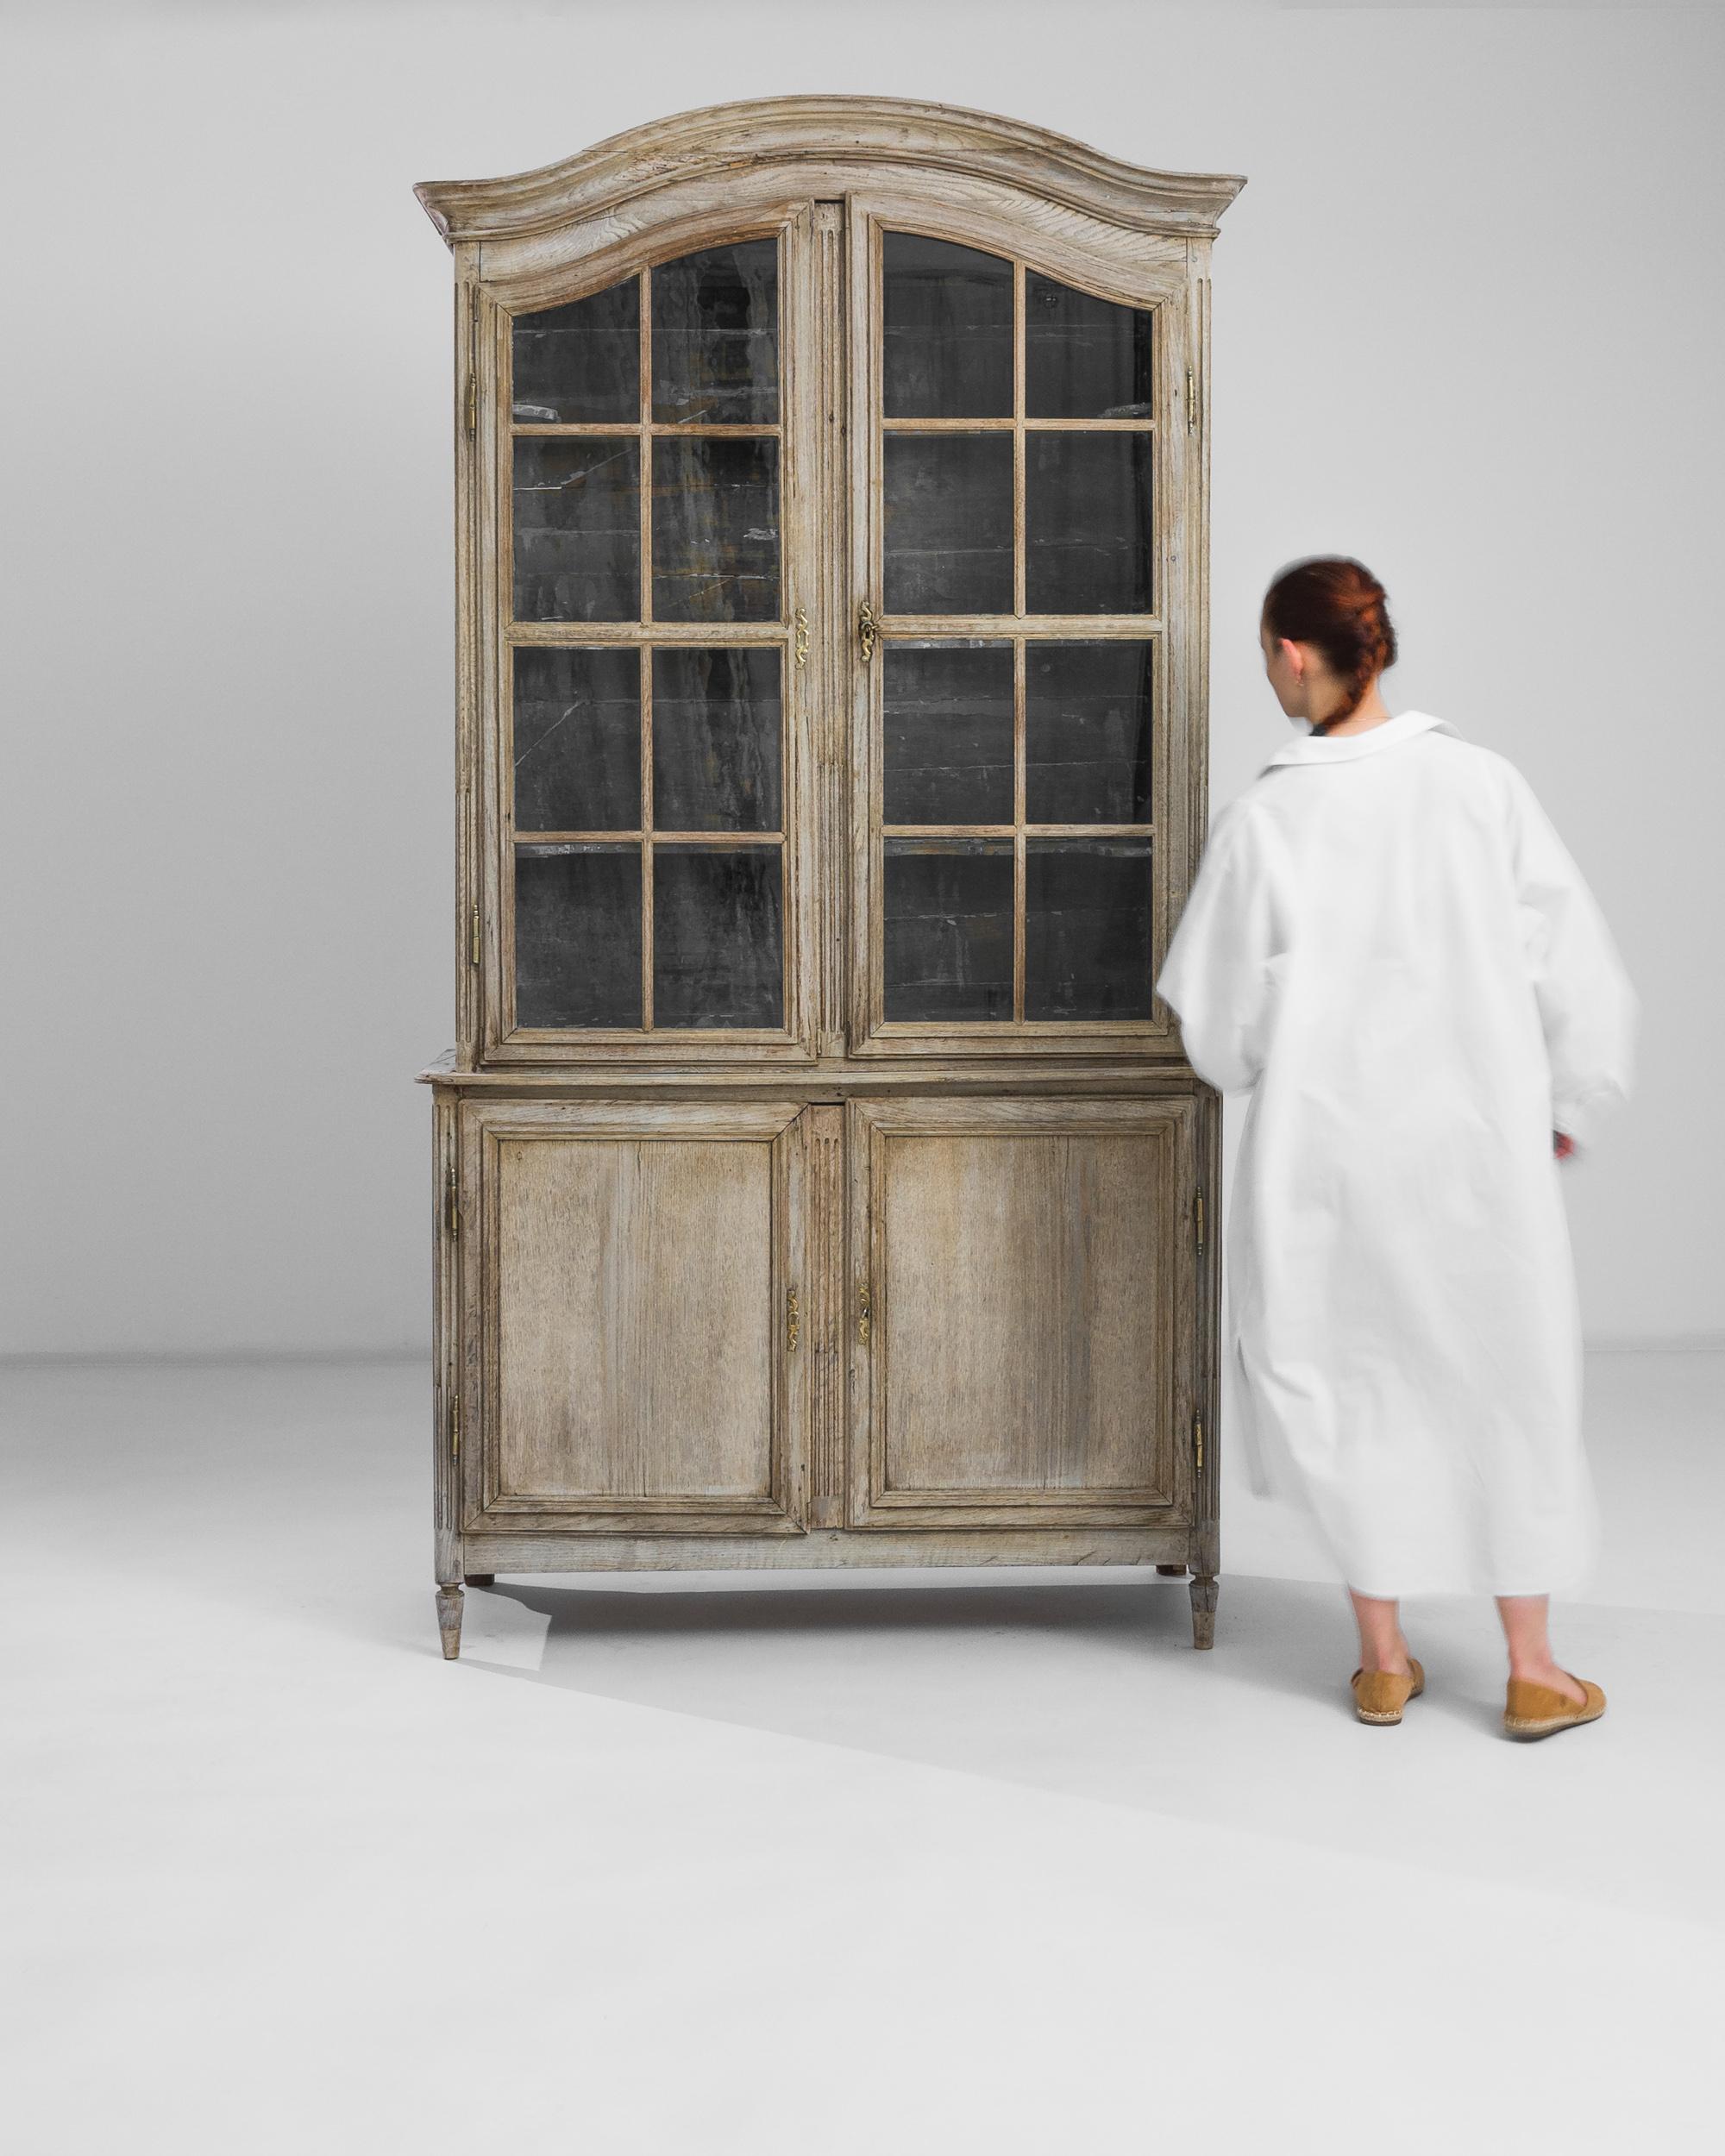 This antique oak vitrine offers a display case which is a treasure in its own right. Made in France in the 1860s, the arch of the cabinet cuts an elegant silhouette; mullioned windows give a view onto patinated shelves. The contrast between bright